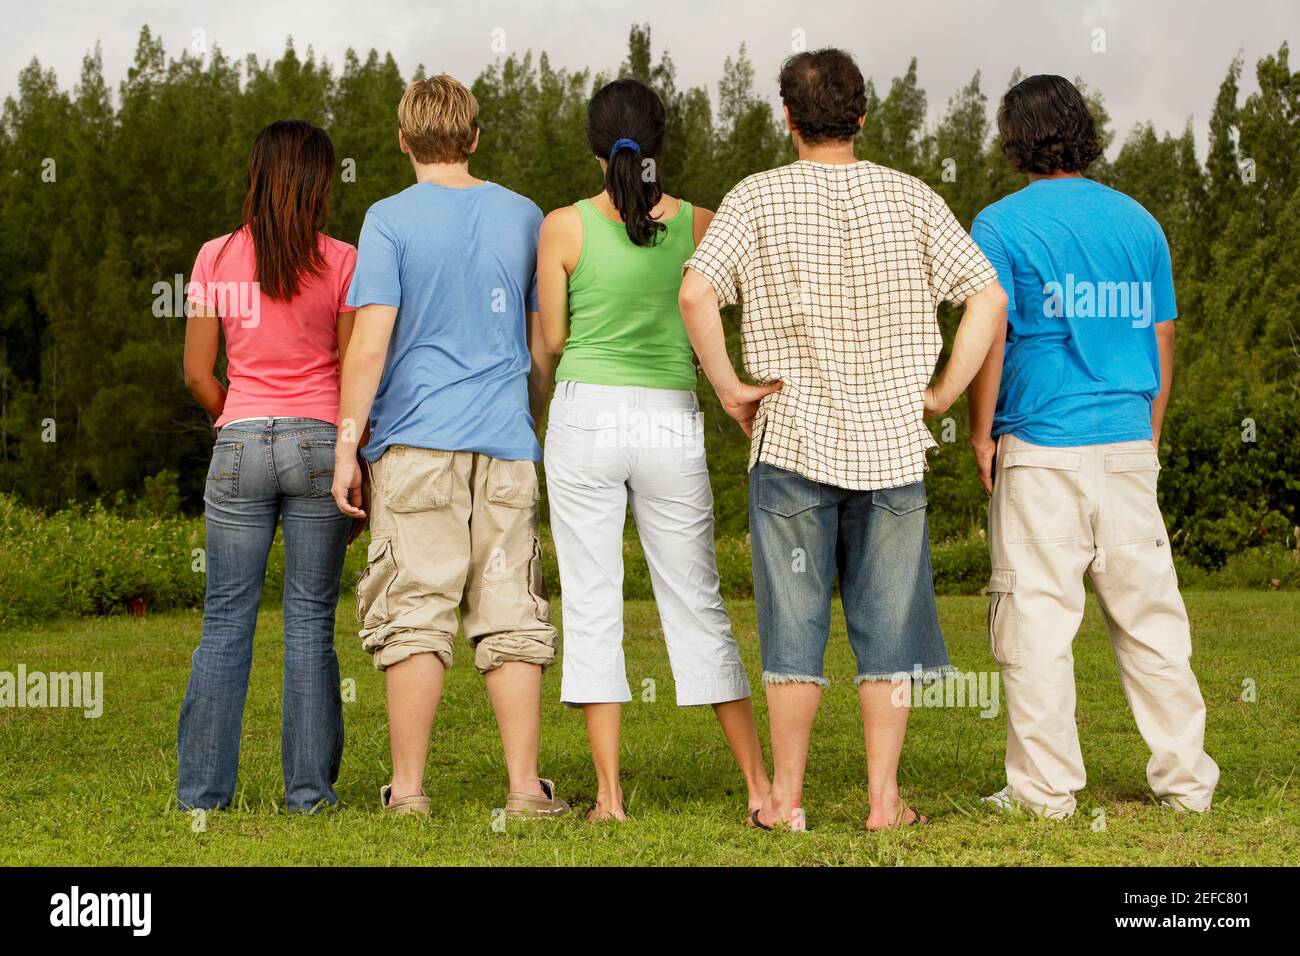 Rear view of five people standing side by side Stock Photo